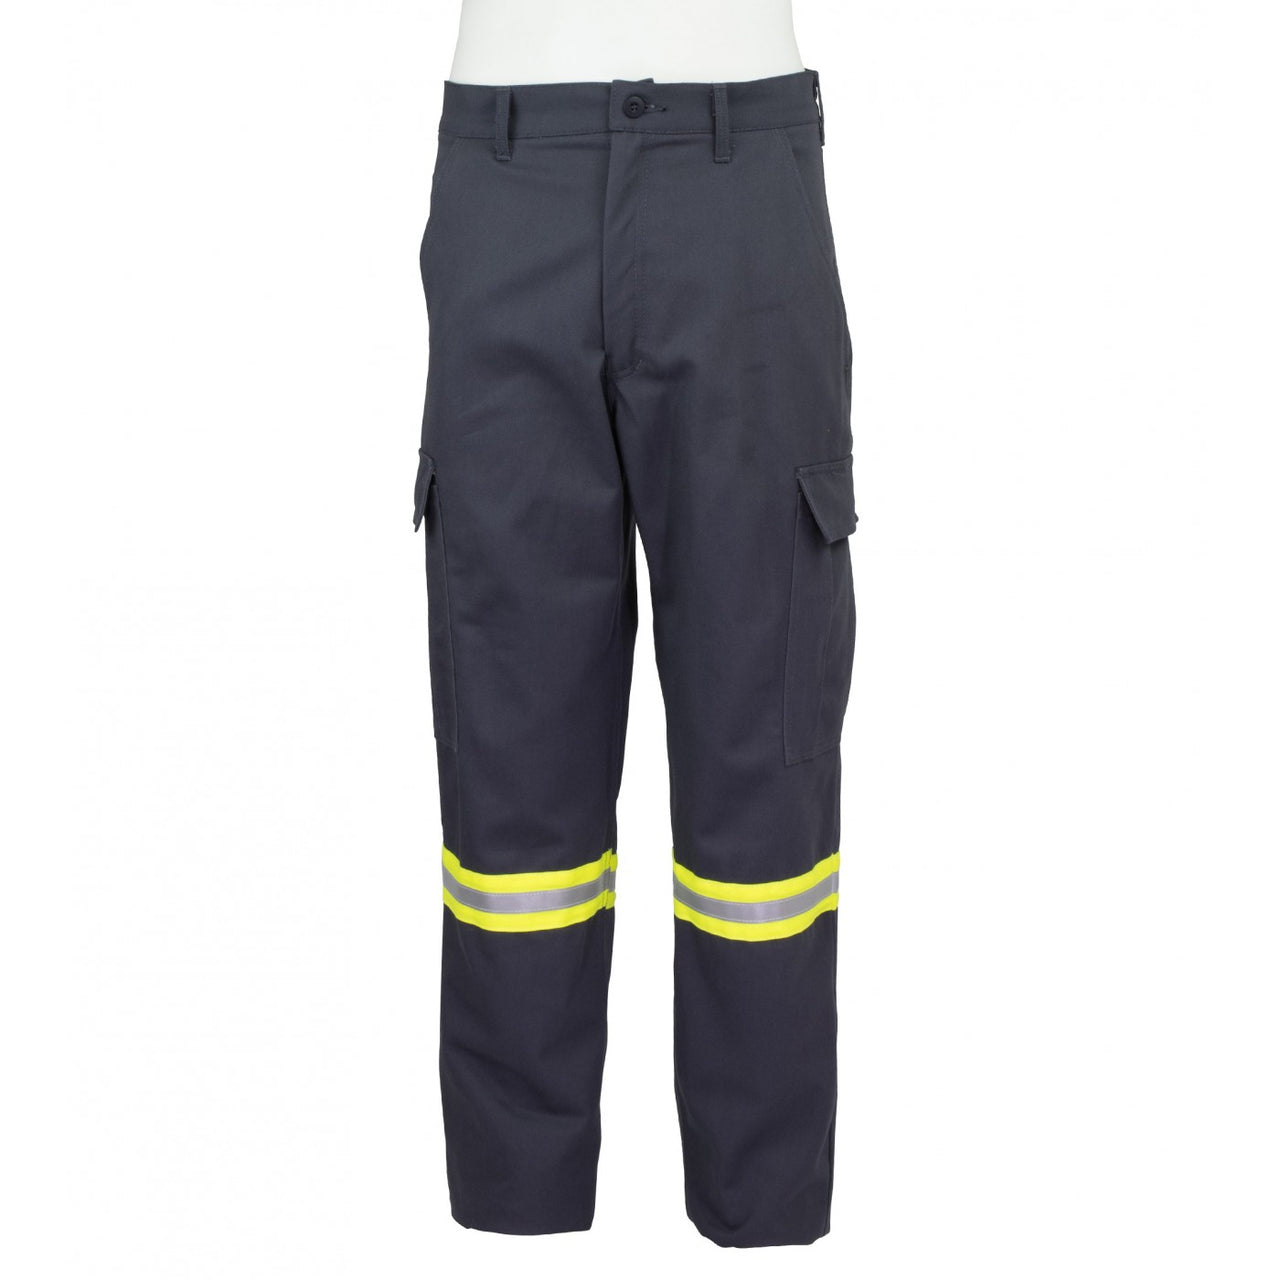 FR Charcoal Gray Cargo Pant W/ Reflective Striping